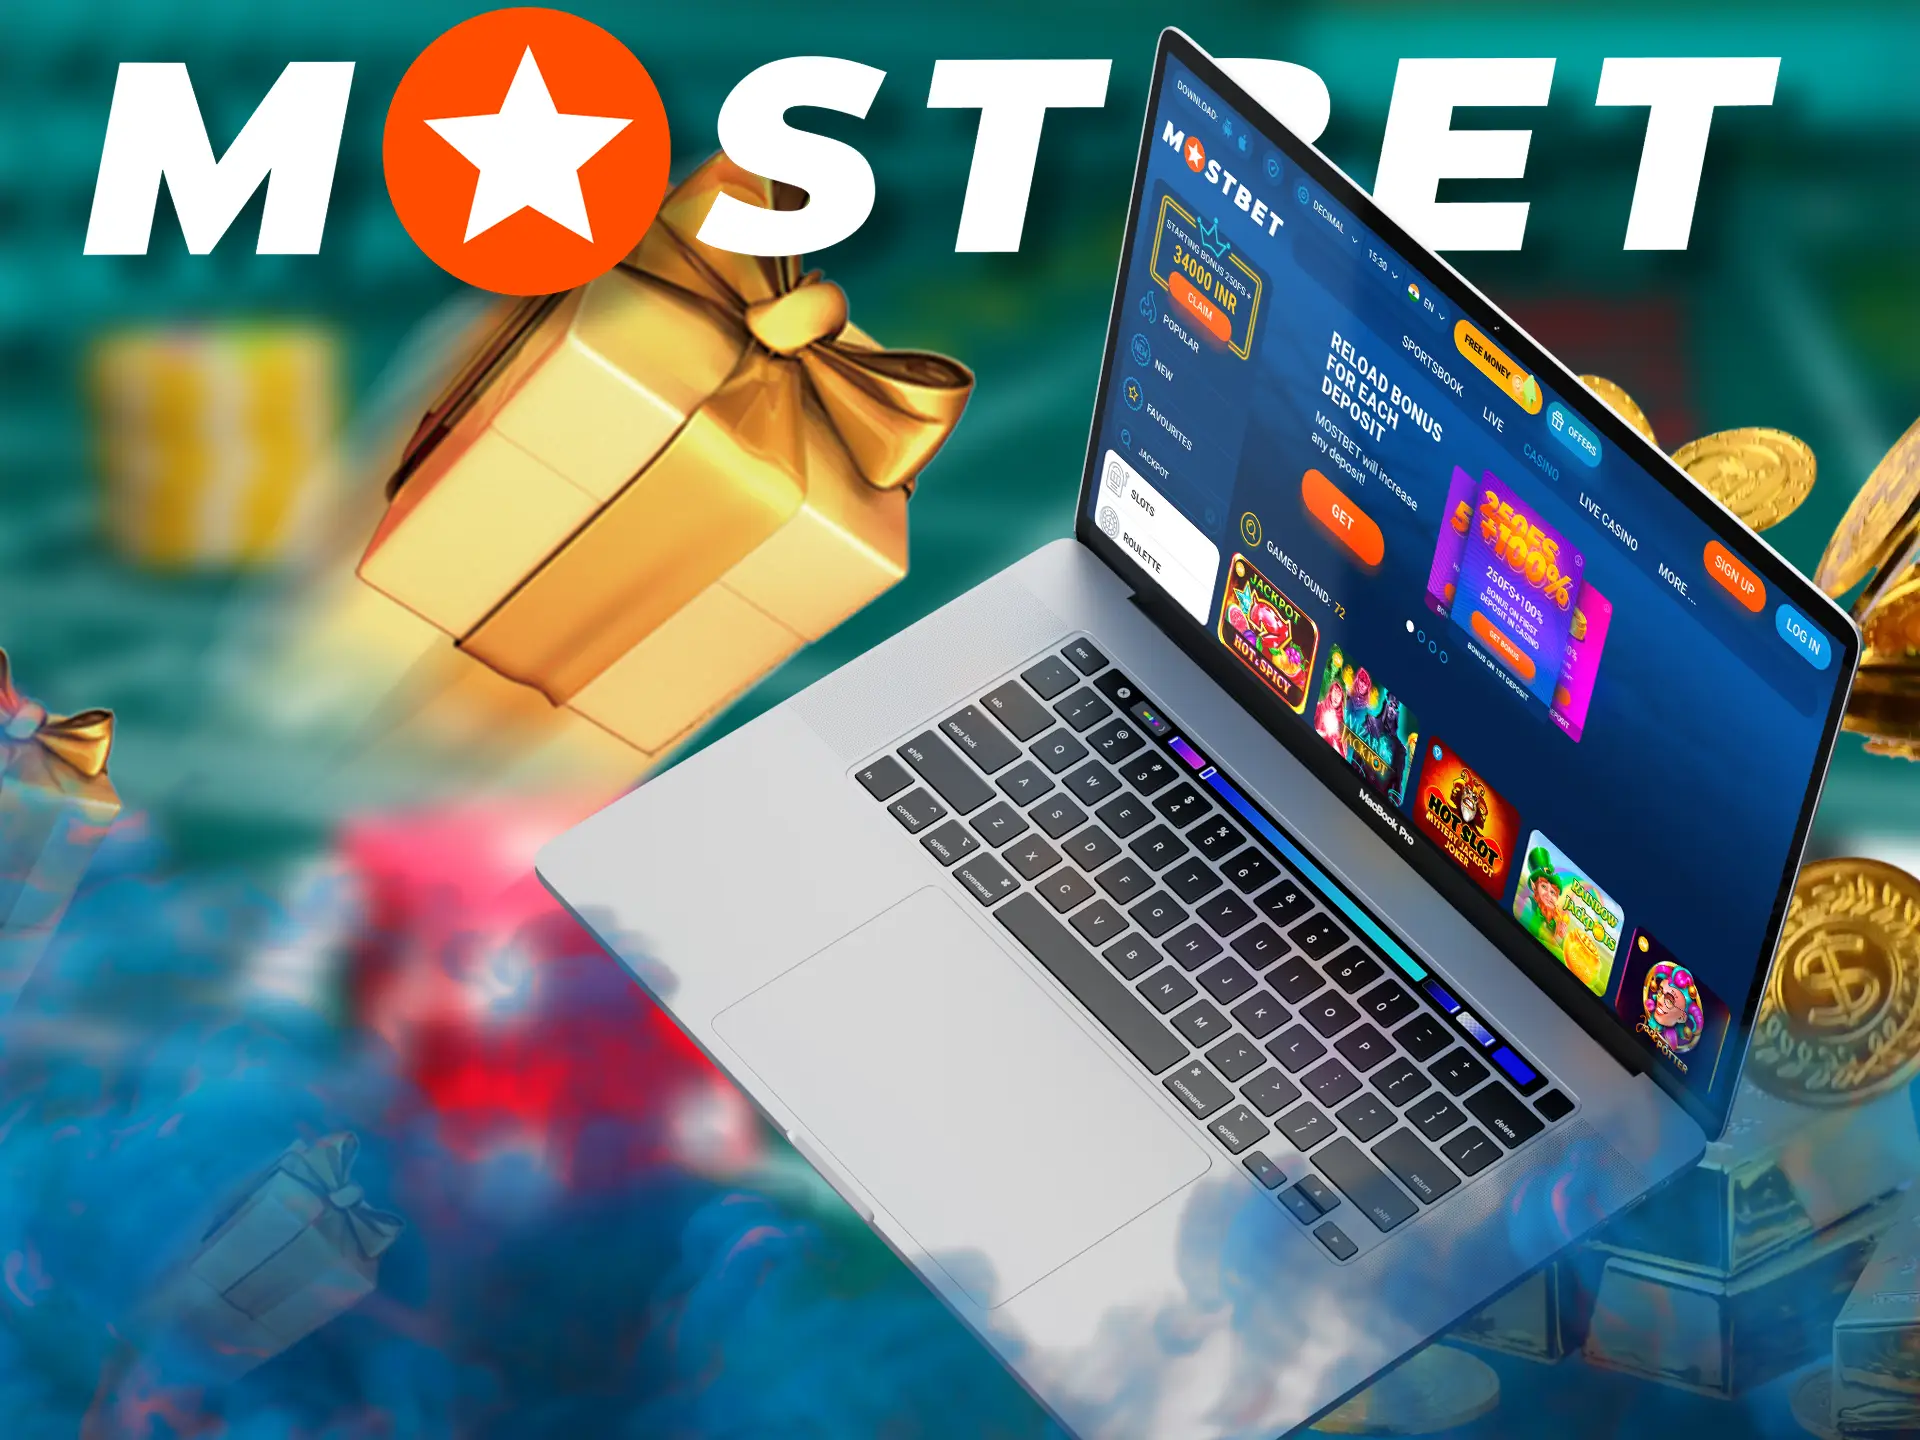 Players will receive a nice compliment for playing on Mostbet's website and app, helping to make it easier to interact with the platform.